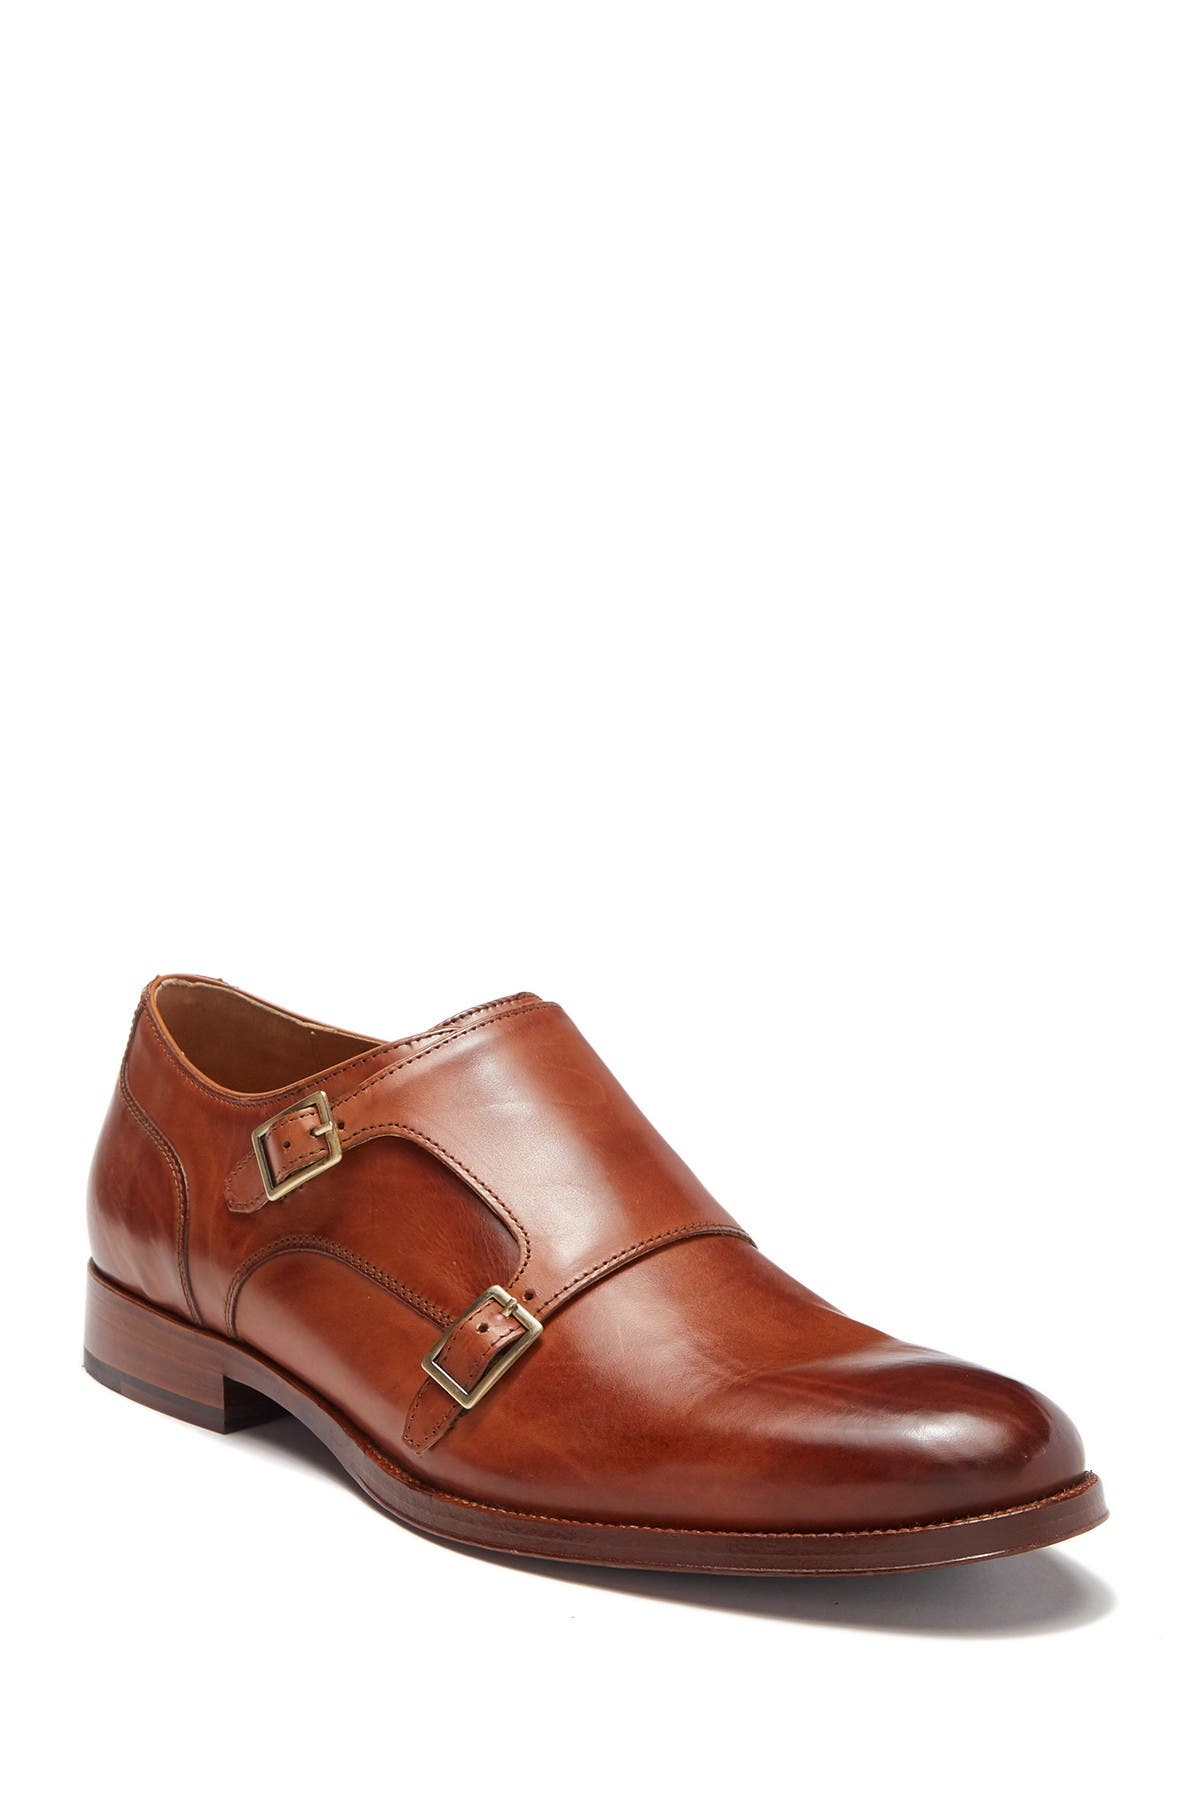 Cole Haan | Grammercy Double Monk Strap 